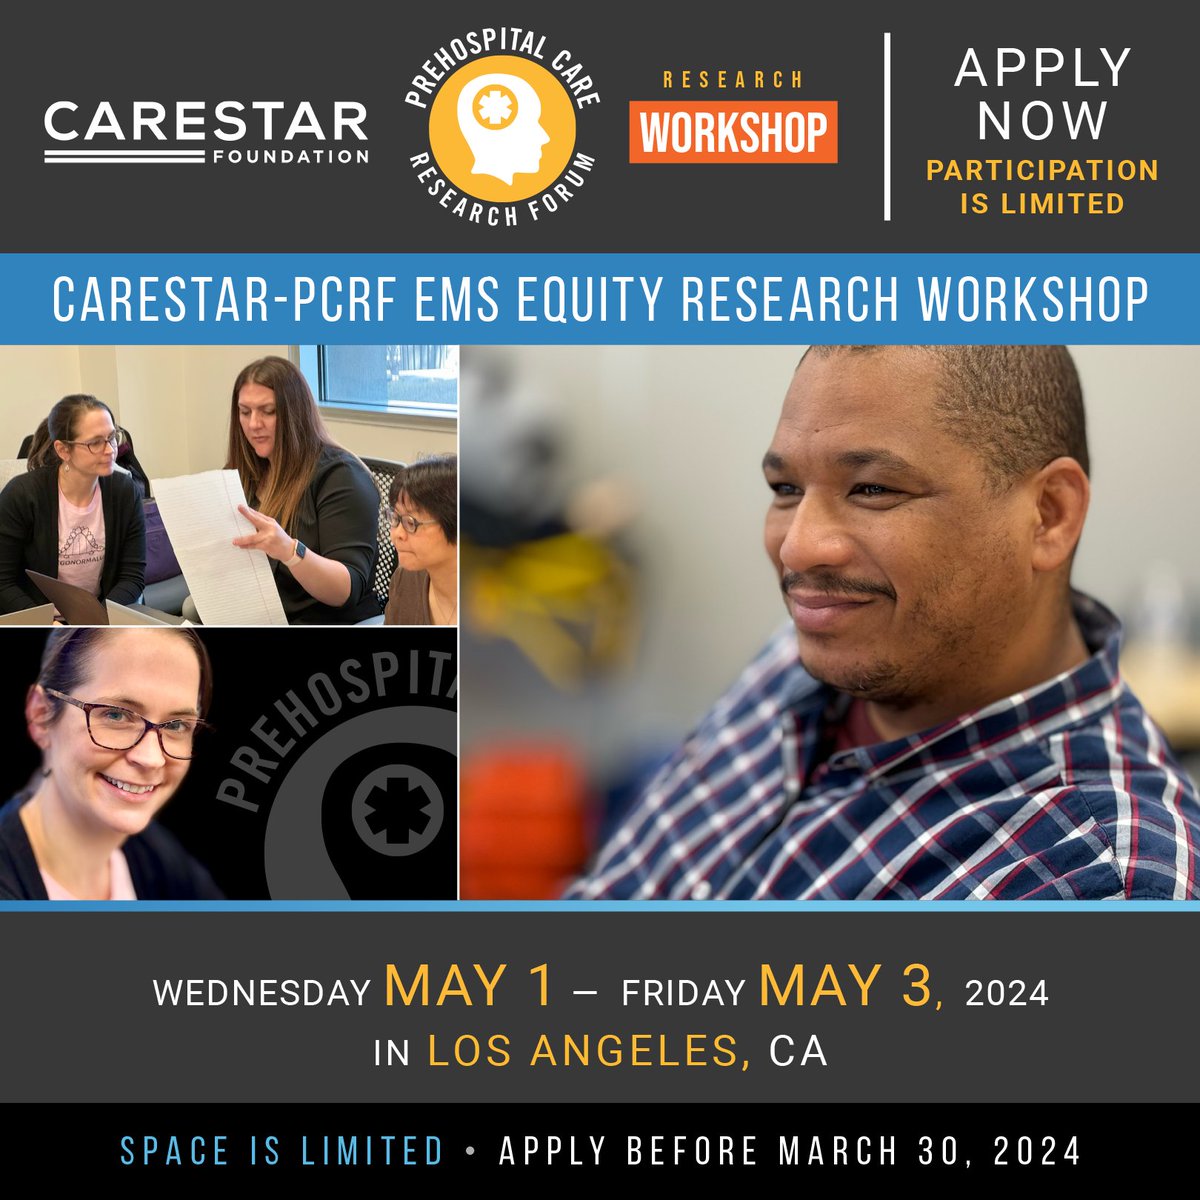 PCRF is excited to announce general applications for the CARESTAR-PCRF EMS Equity Research Workshop, May 1-3 at the Paramedic campus in Los Angeles. The Workshop is focused on CA EMS personnel and the importance of diversity, equity and inclusivity: ow.ly/92Cz50QWamS